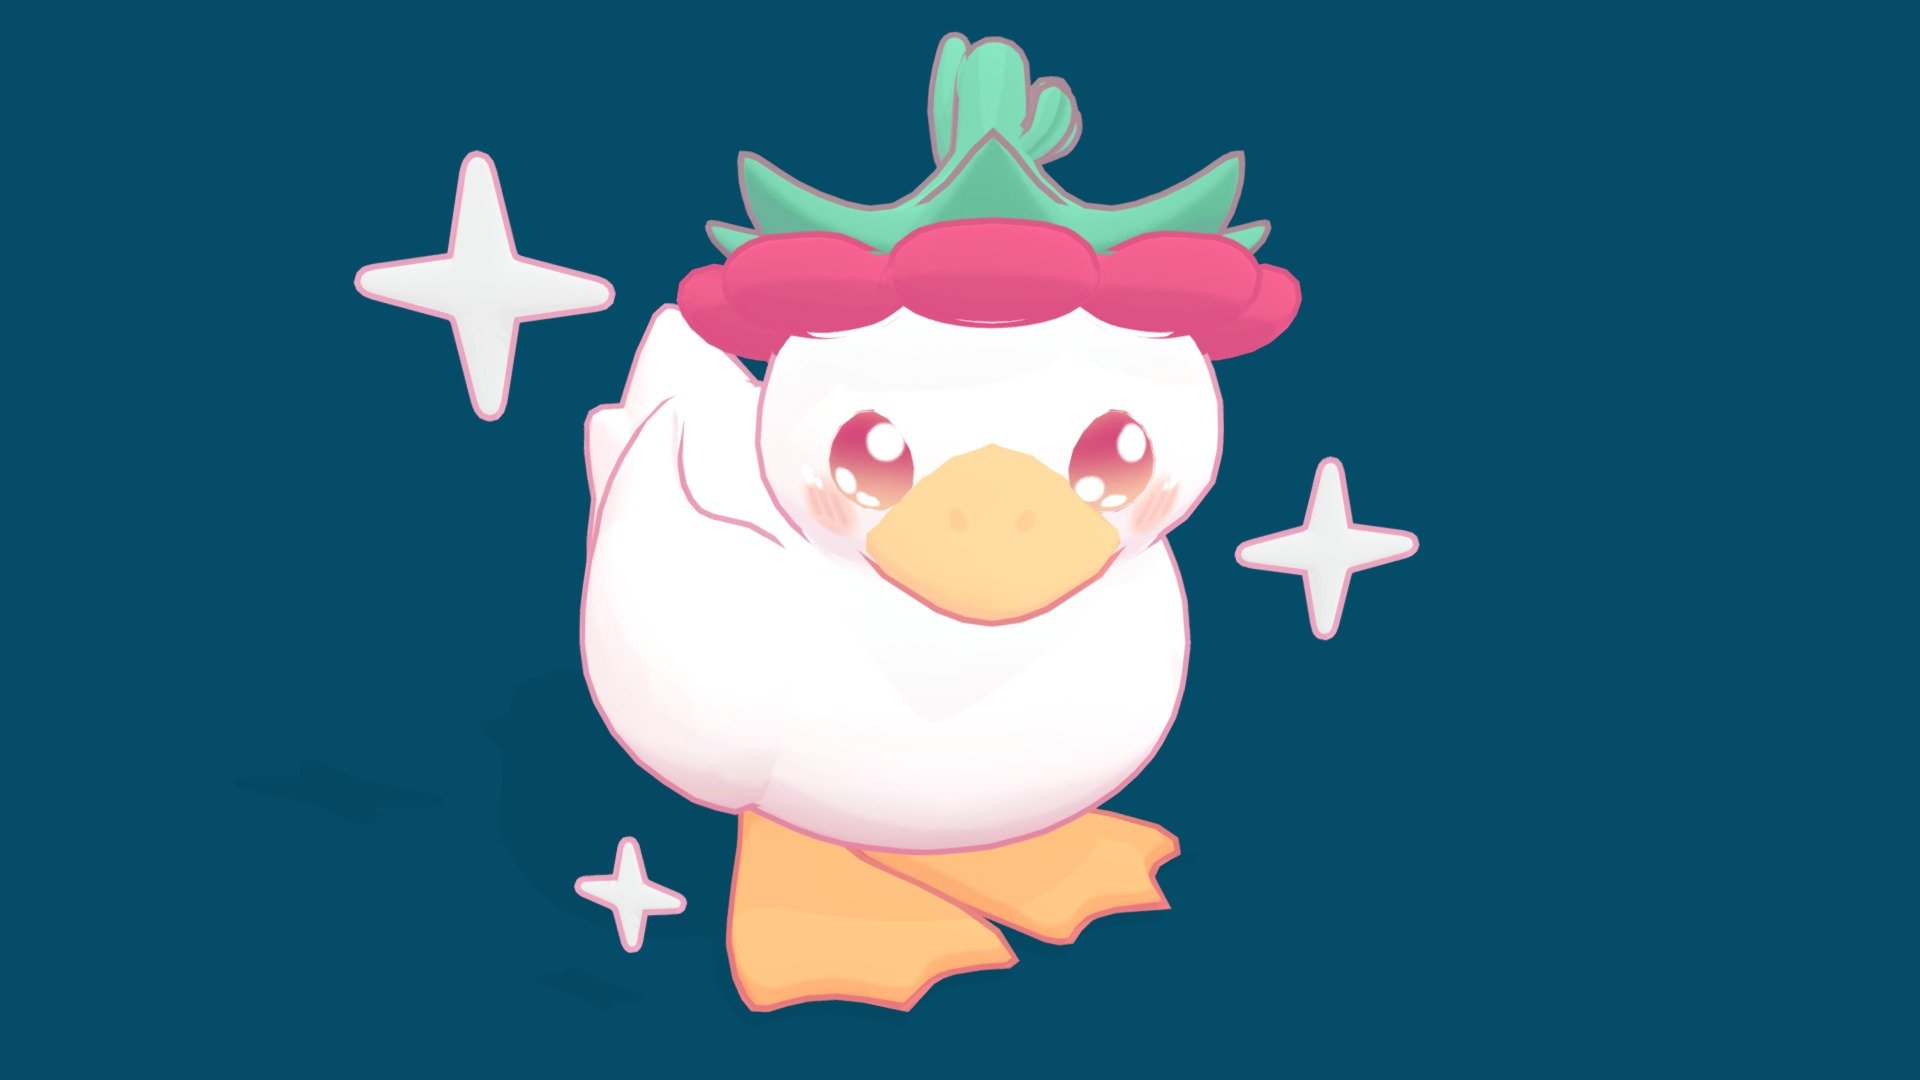 I had some free time on my hand and wanted to try something new. So I came up with a small and simple project that allowed me to test a artstyle I never tried before. For some reason cute simplistic artstyles are really difficult and intimidating for me. But nevertheless, I hope you like it &lt;3 - Cute Flower Duck - 3D model by Christiane Schaper (@ChristianeSchaper) 3d model